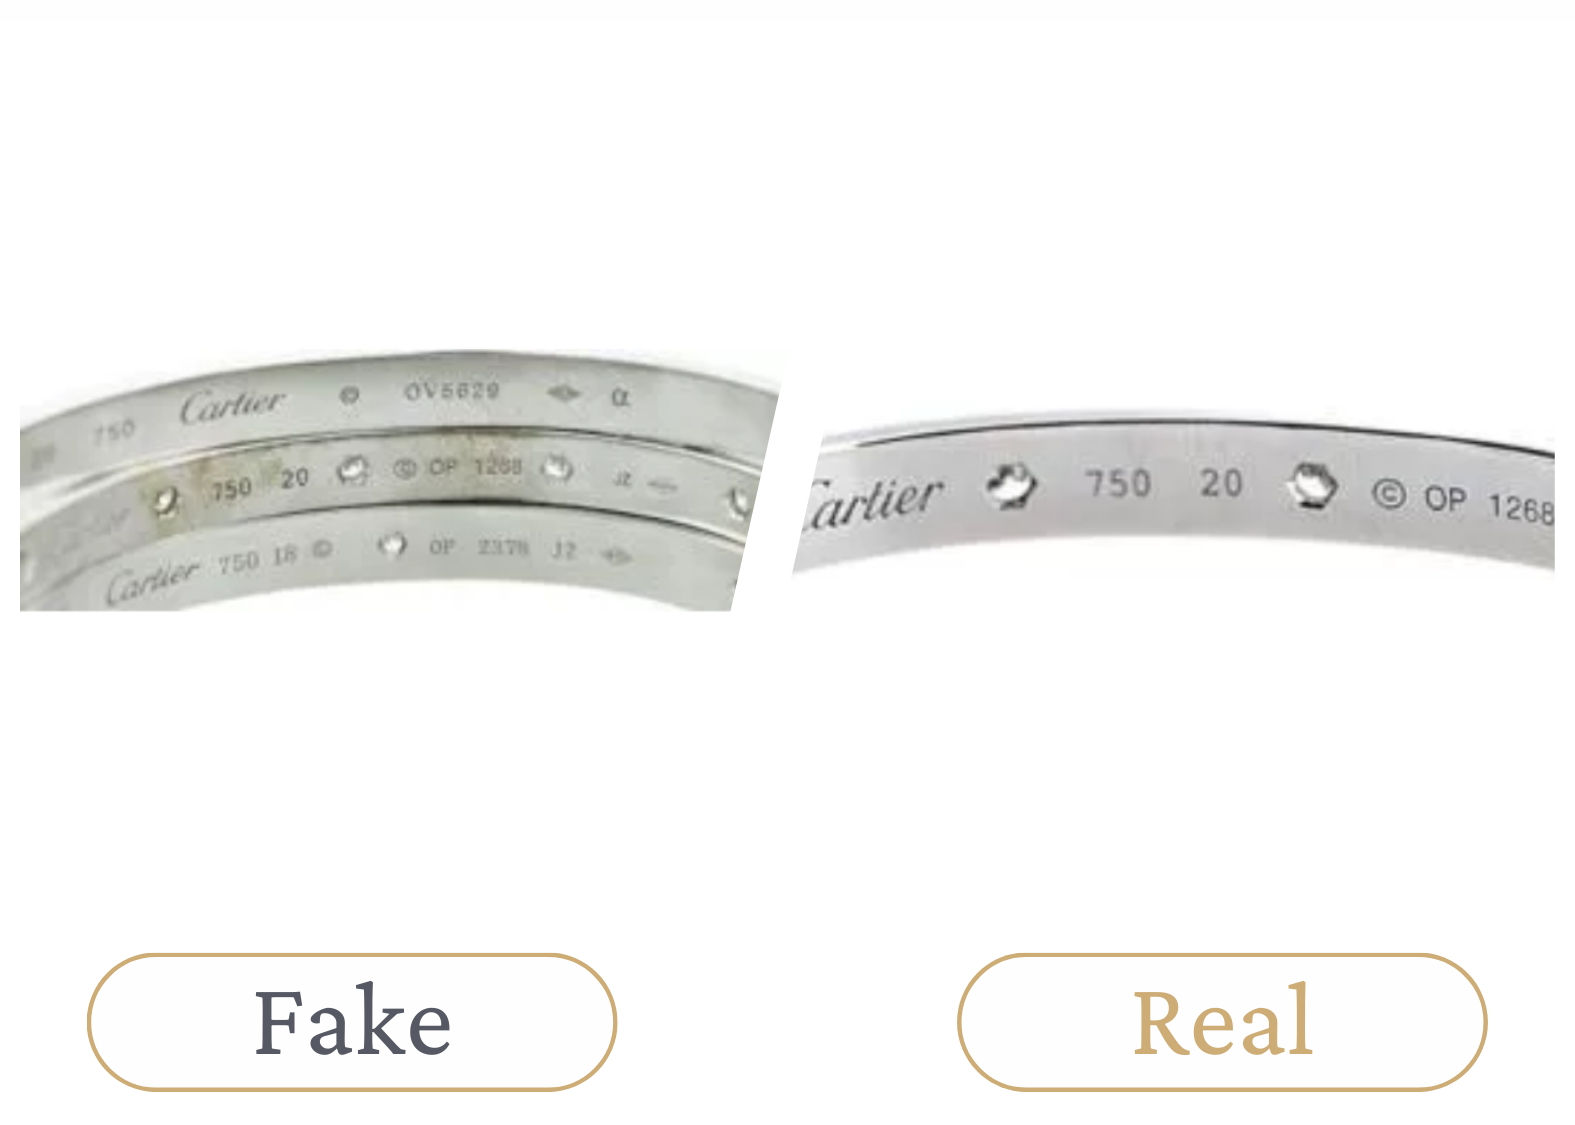 How To Spot A Fake Cartier Love Bracelet? - Fake vs real 4